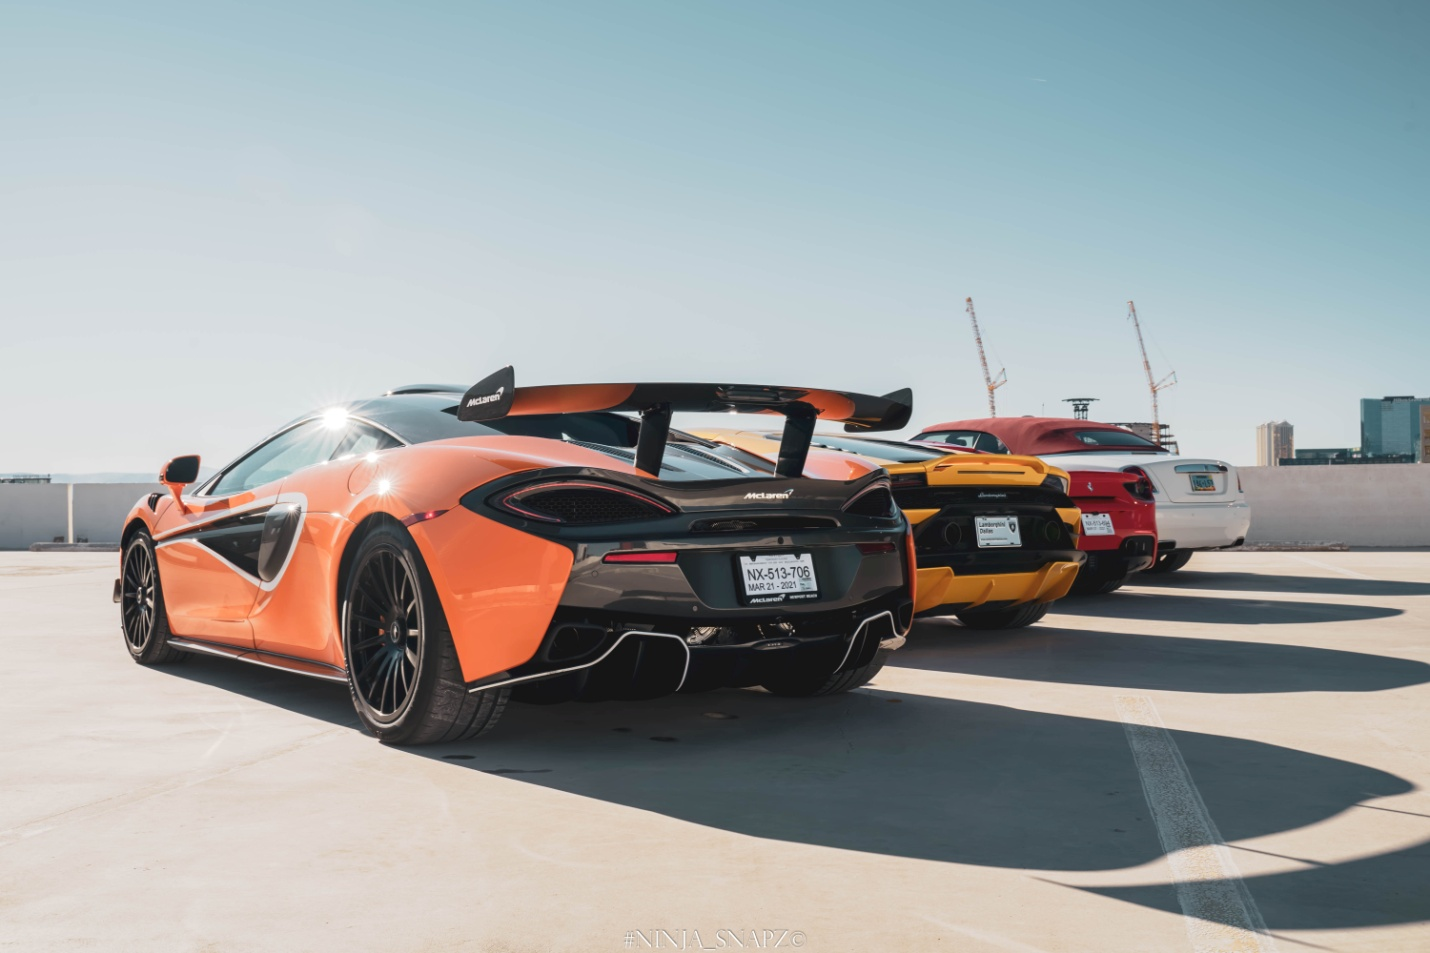 Close up picture of fours supercars parked